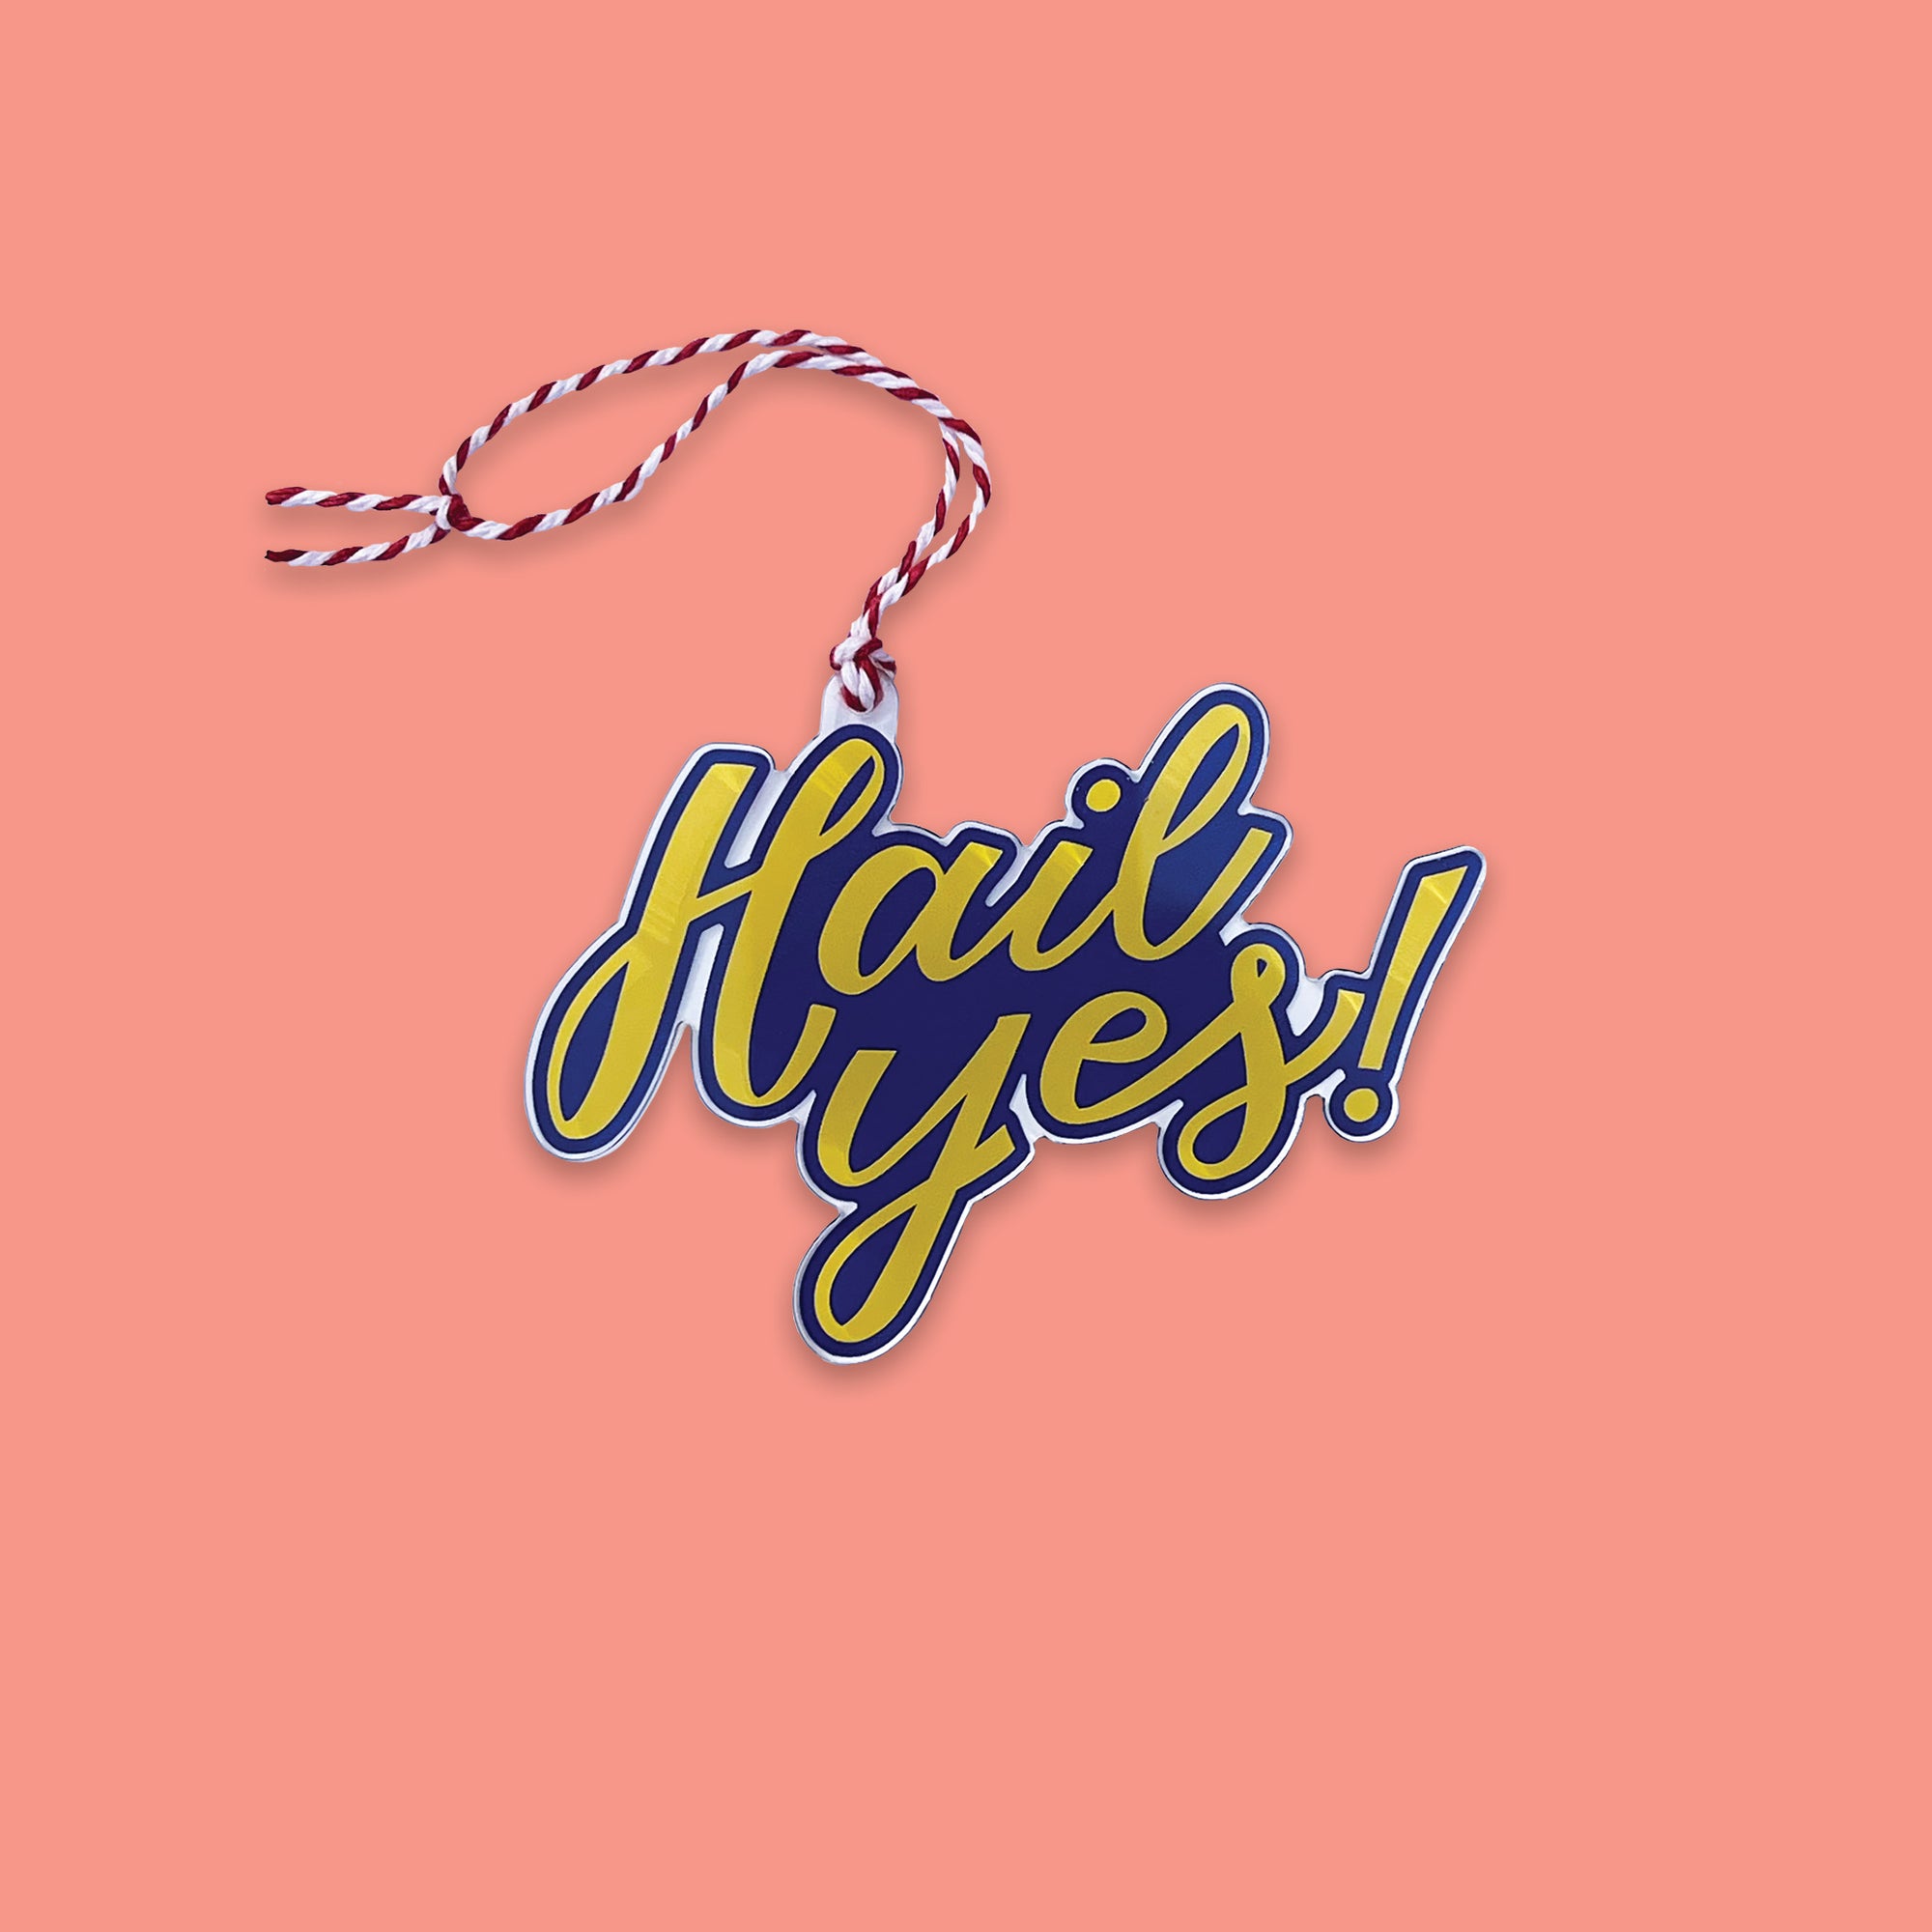 On a coral pink background sits an acrylic ornament with red and white string. It says "Hail Yes!" in maize and blue script lettering.